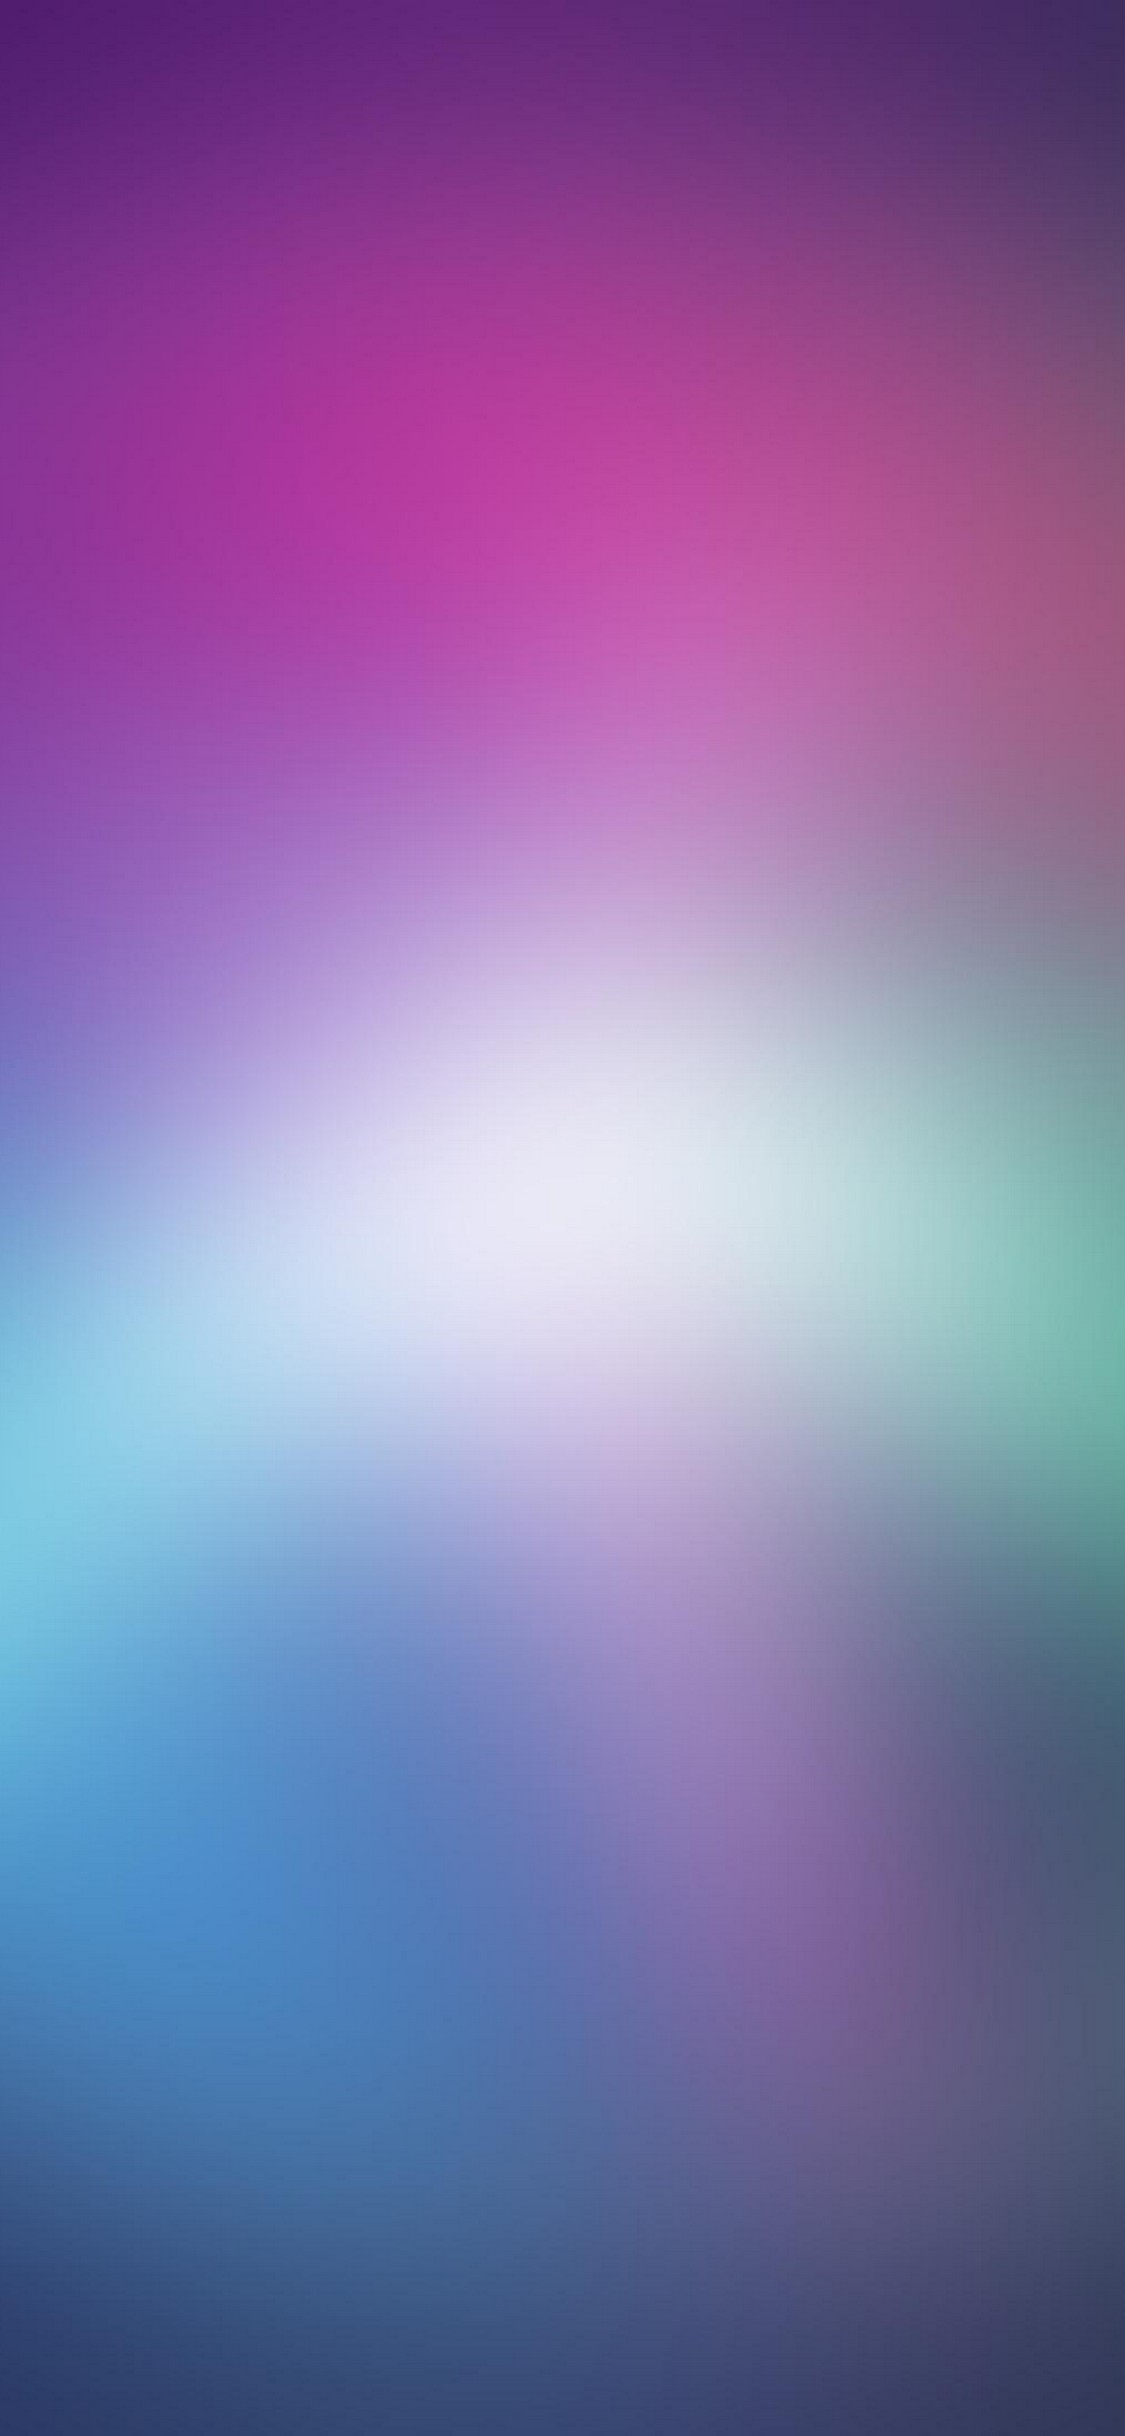 Iphone X Wallpaper Dimensions We ve gathered more than 5 million images ...